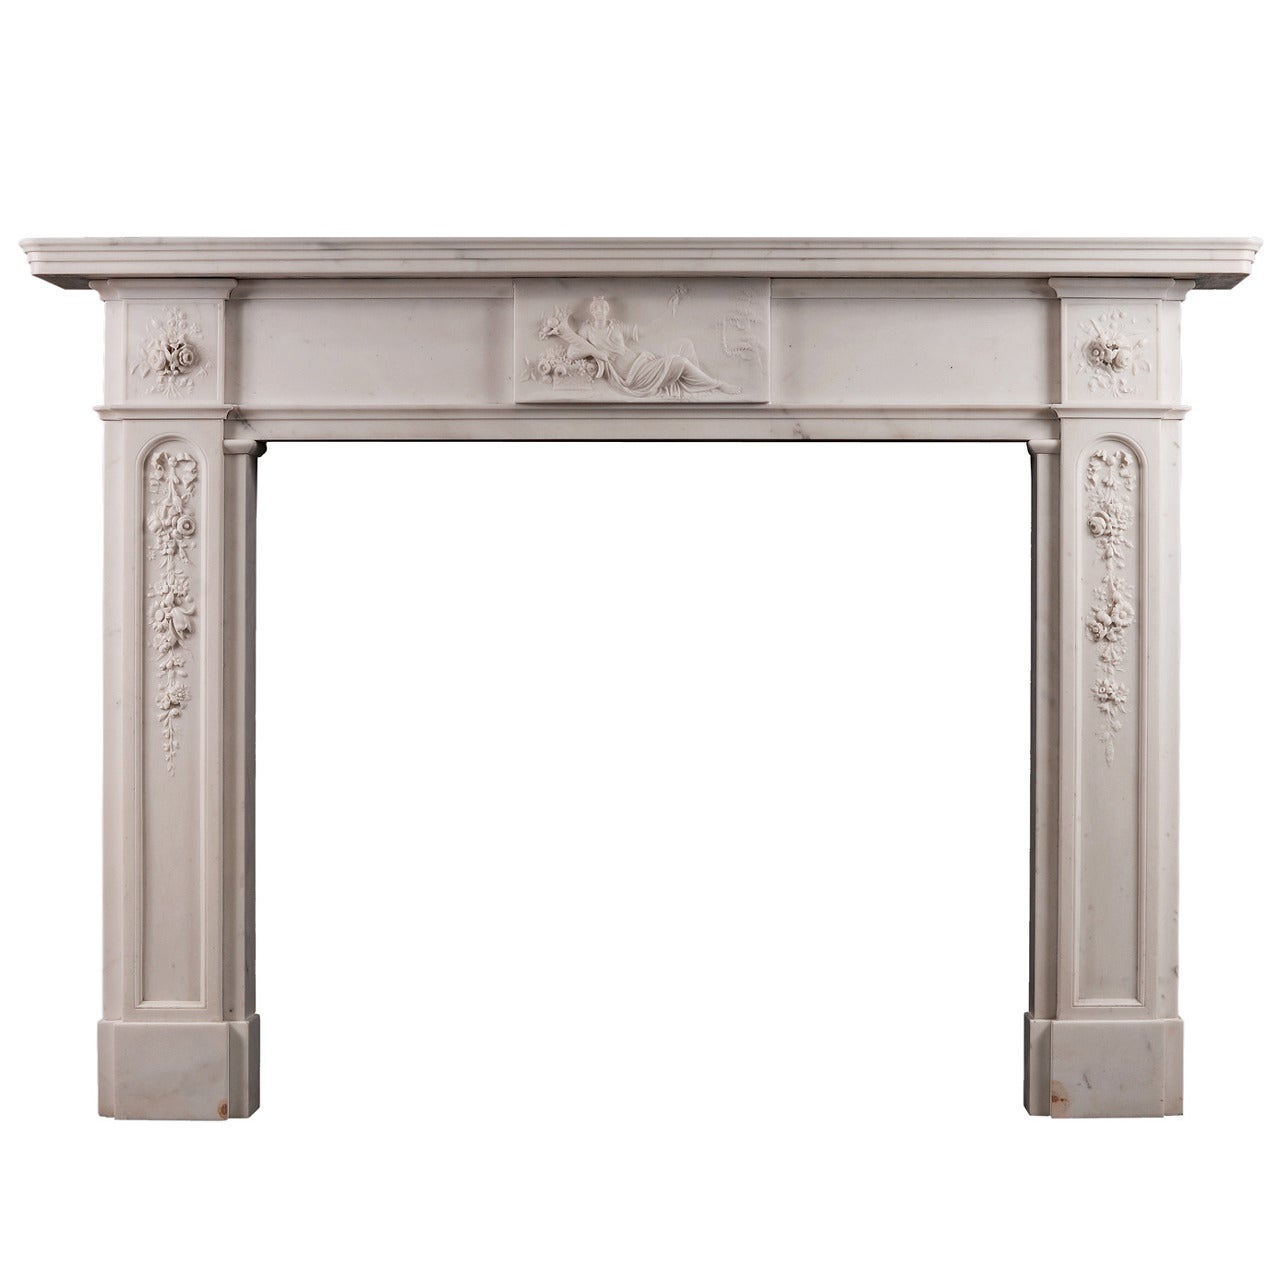 Period Regency Statuary Marble Fireplace Mantel For Sale